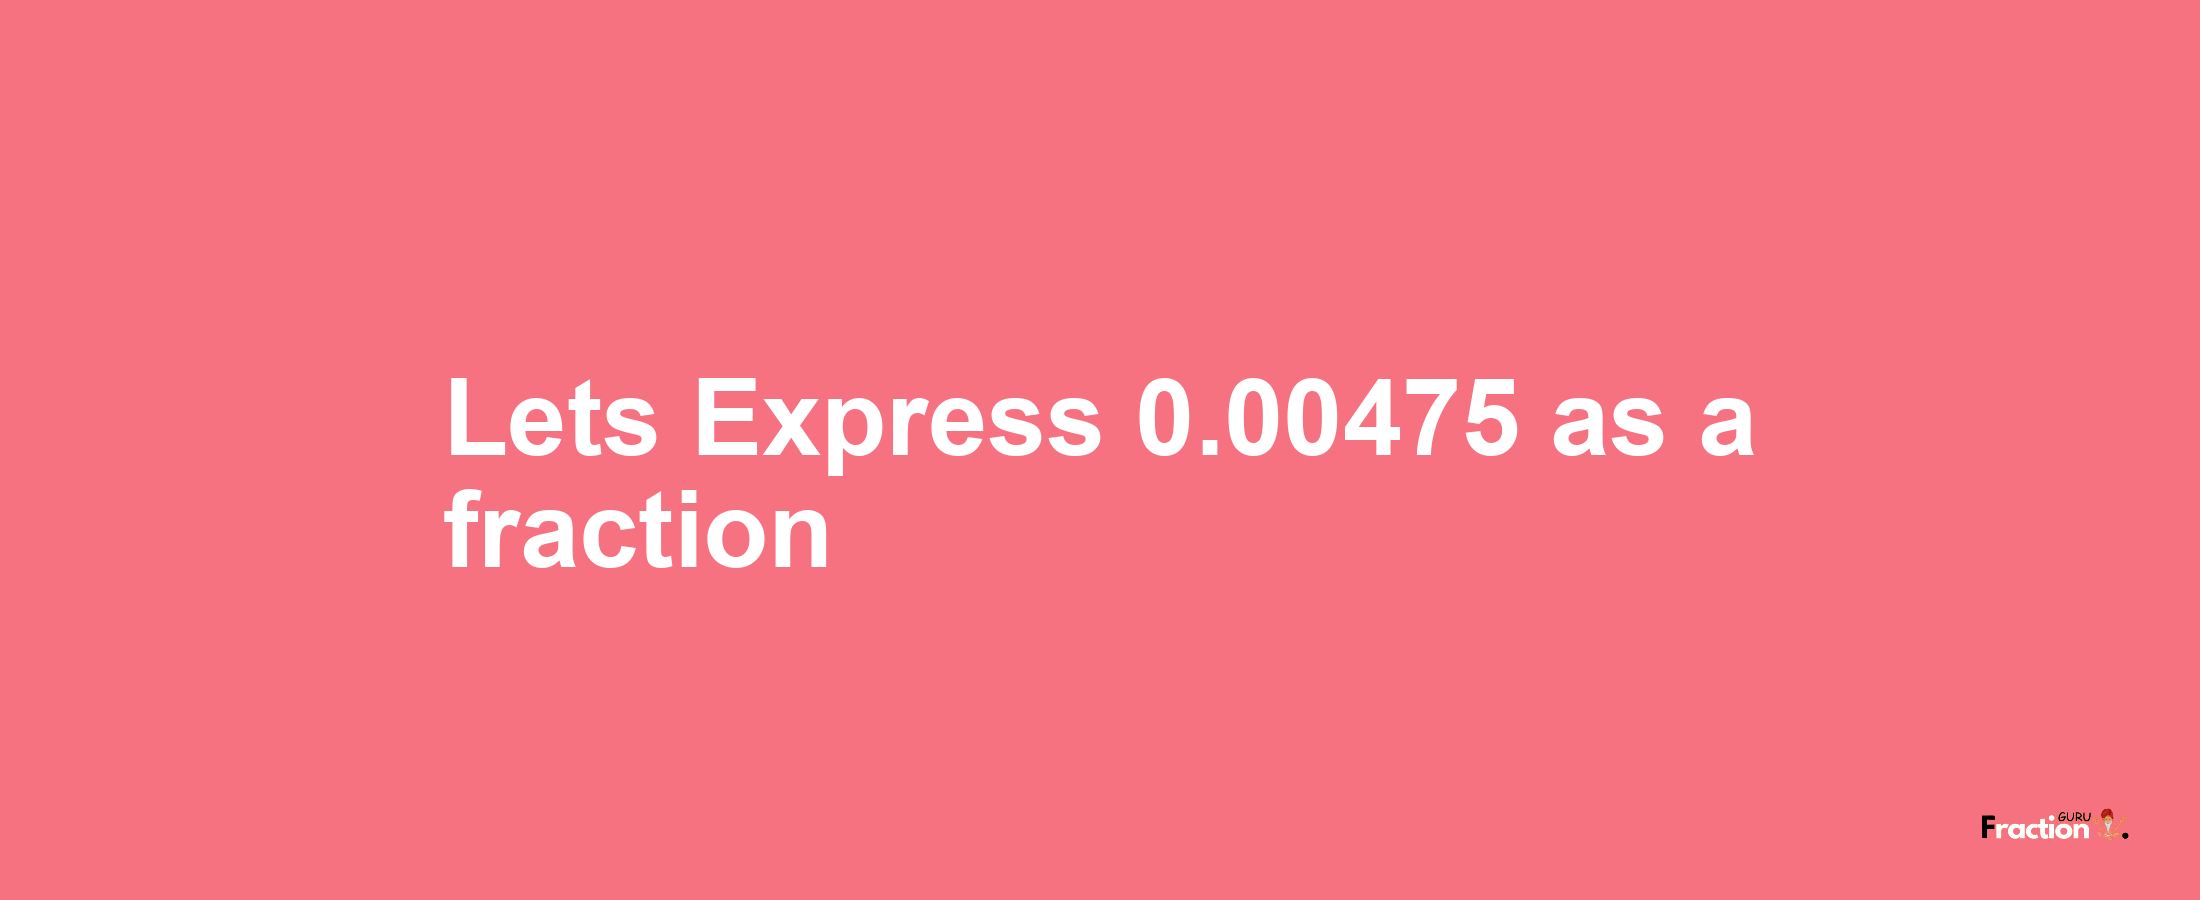 Lets Express 0.00475 as afraction